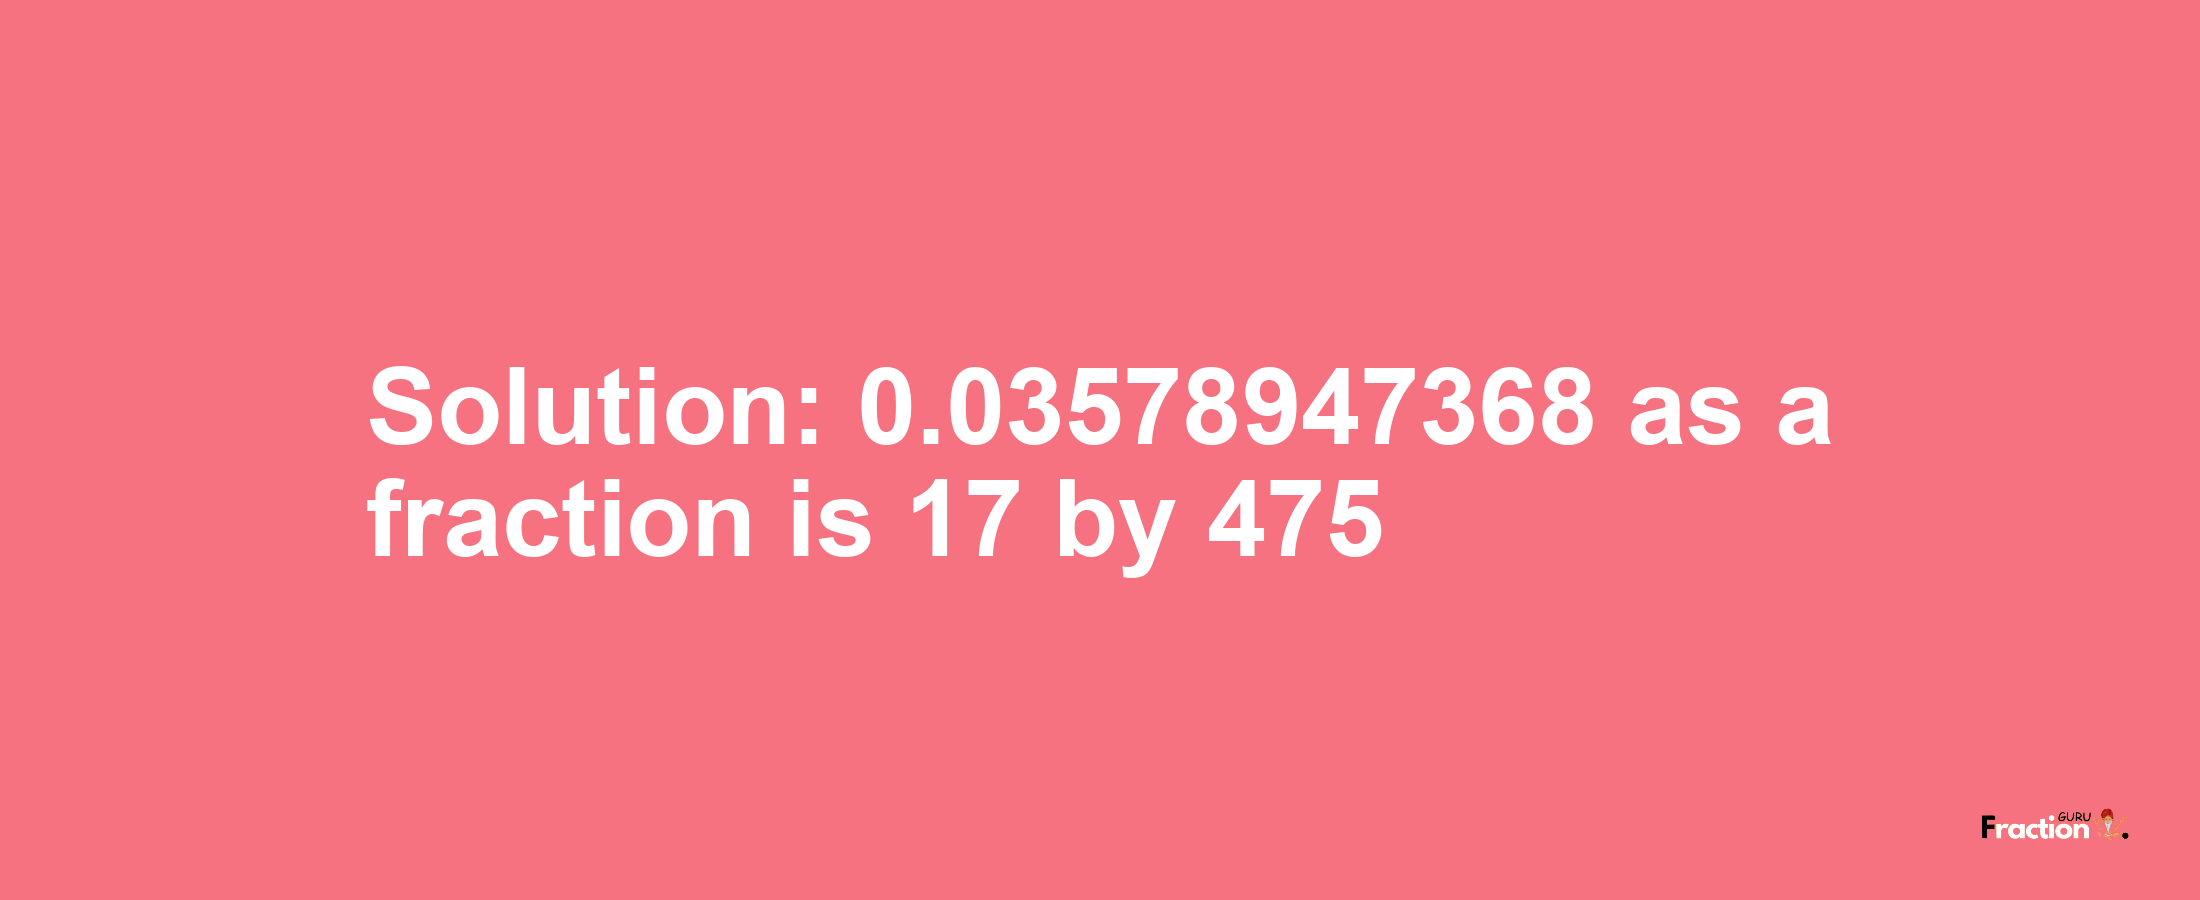 Solution:0.03578947368 as a fraction is 17/475